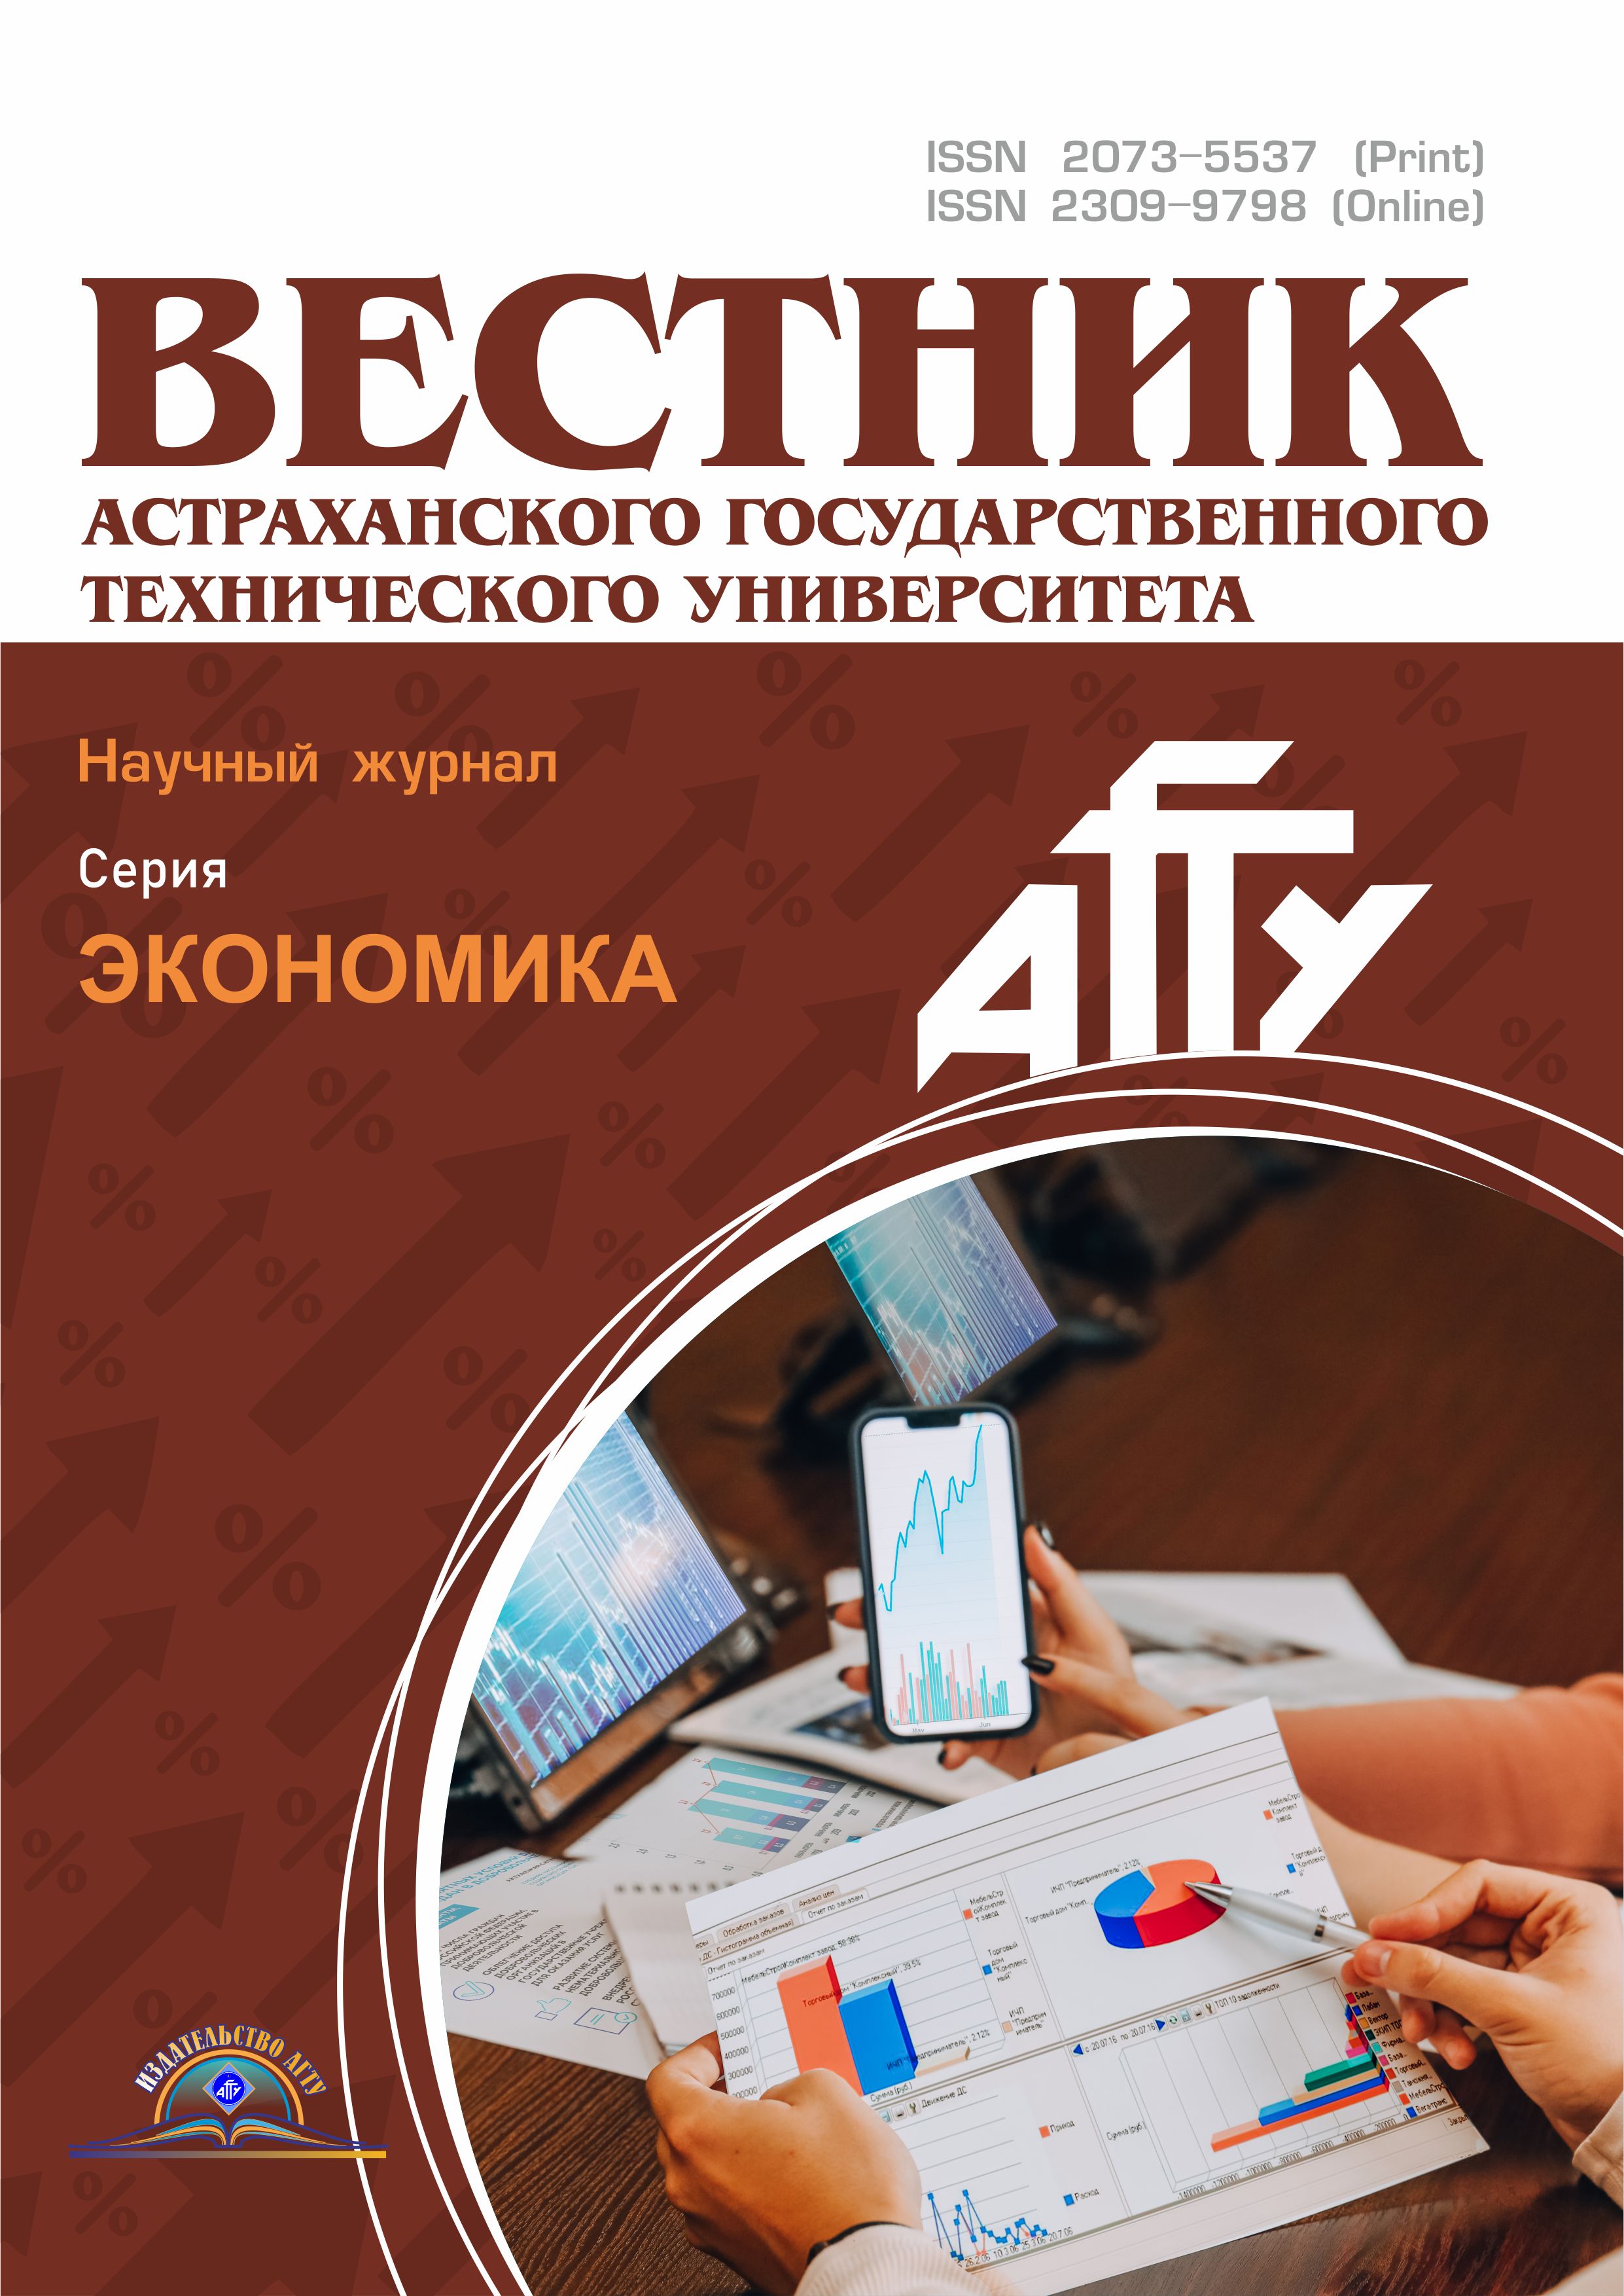                         IMPACT OF THE DEMOGRAPHIC COMPONENT ON THE MARKET OF EDUCATIONAL SERVICES OF ASTRAKHAN
            